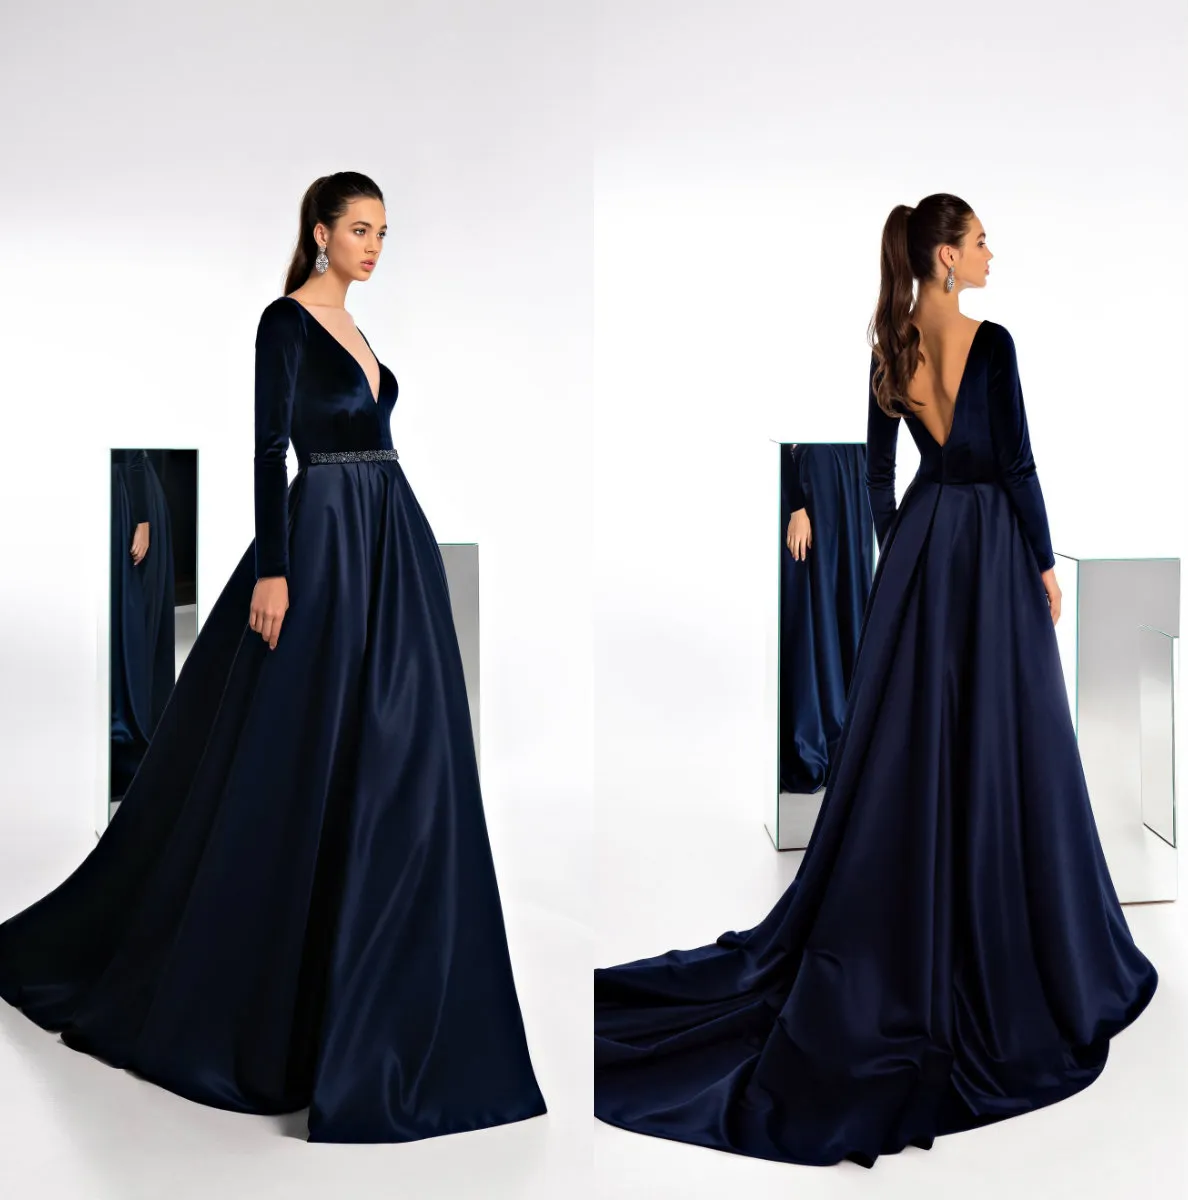 Elegant Evening Dresses V Neck Long Sleeves Lace Satin Prom Gowns 2021 Custom Made Sexy Backless Special Occasion Dress